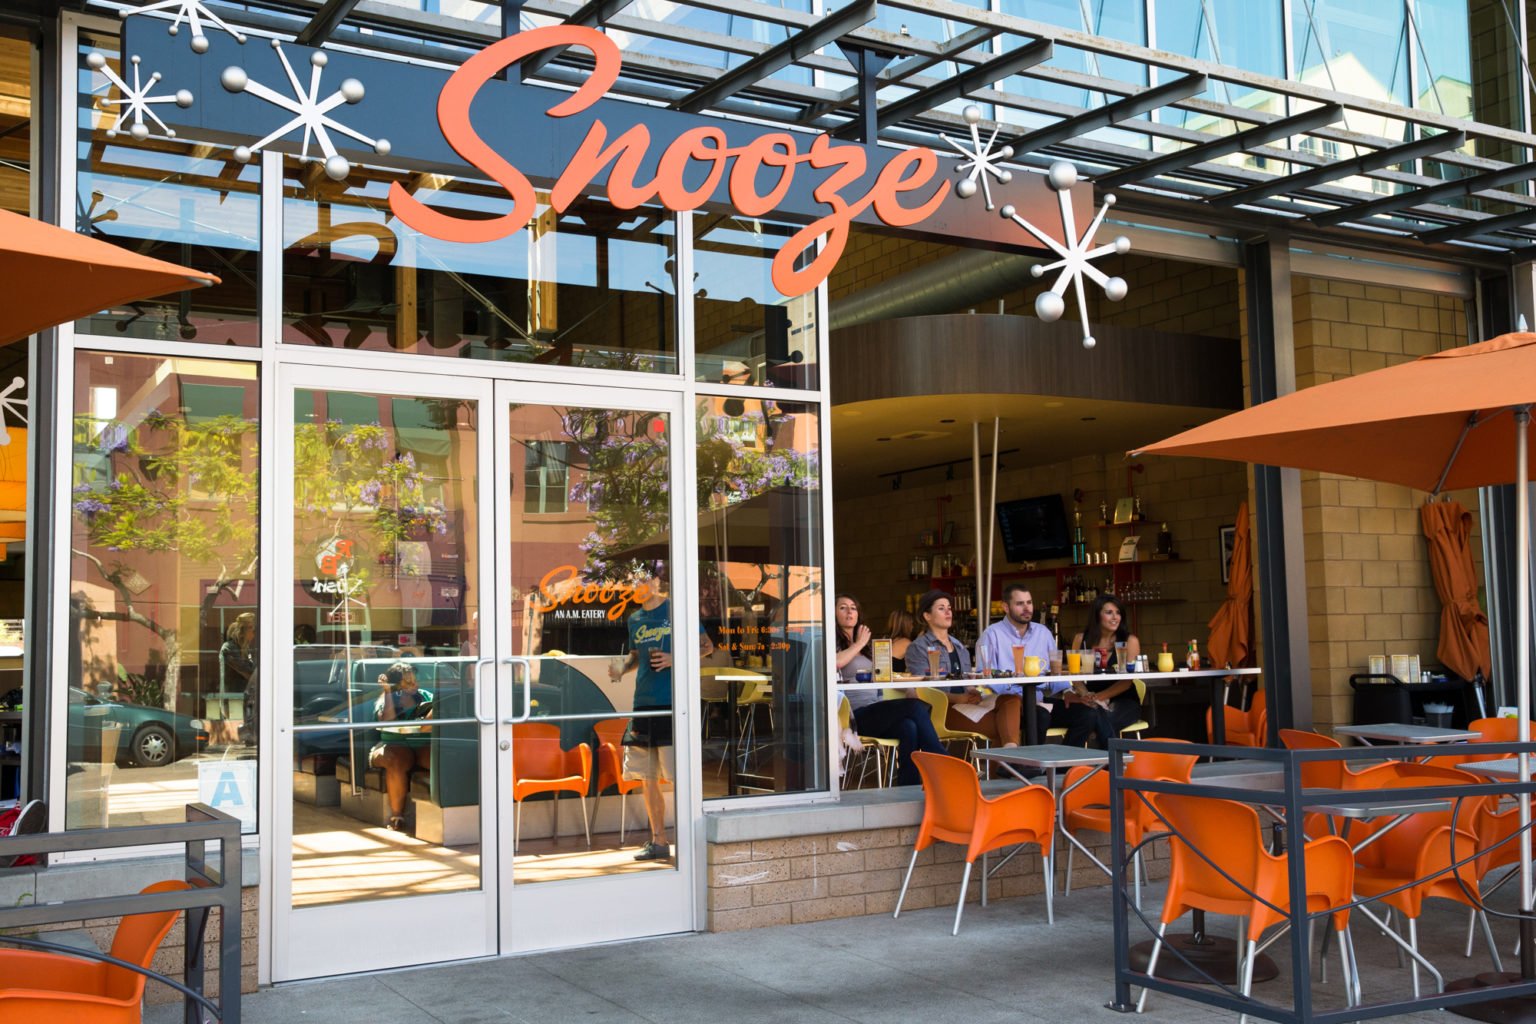 snooze eatery charlotte nc